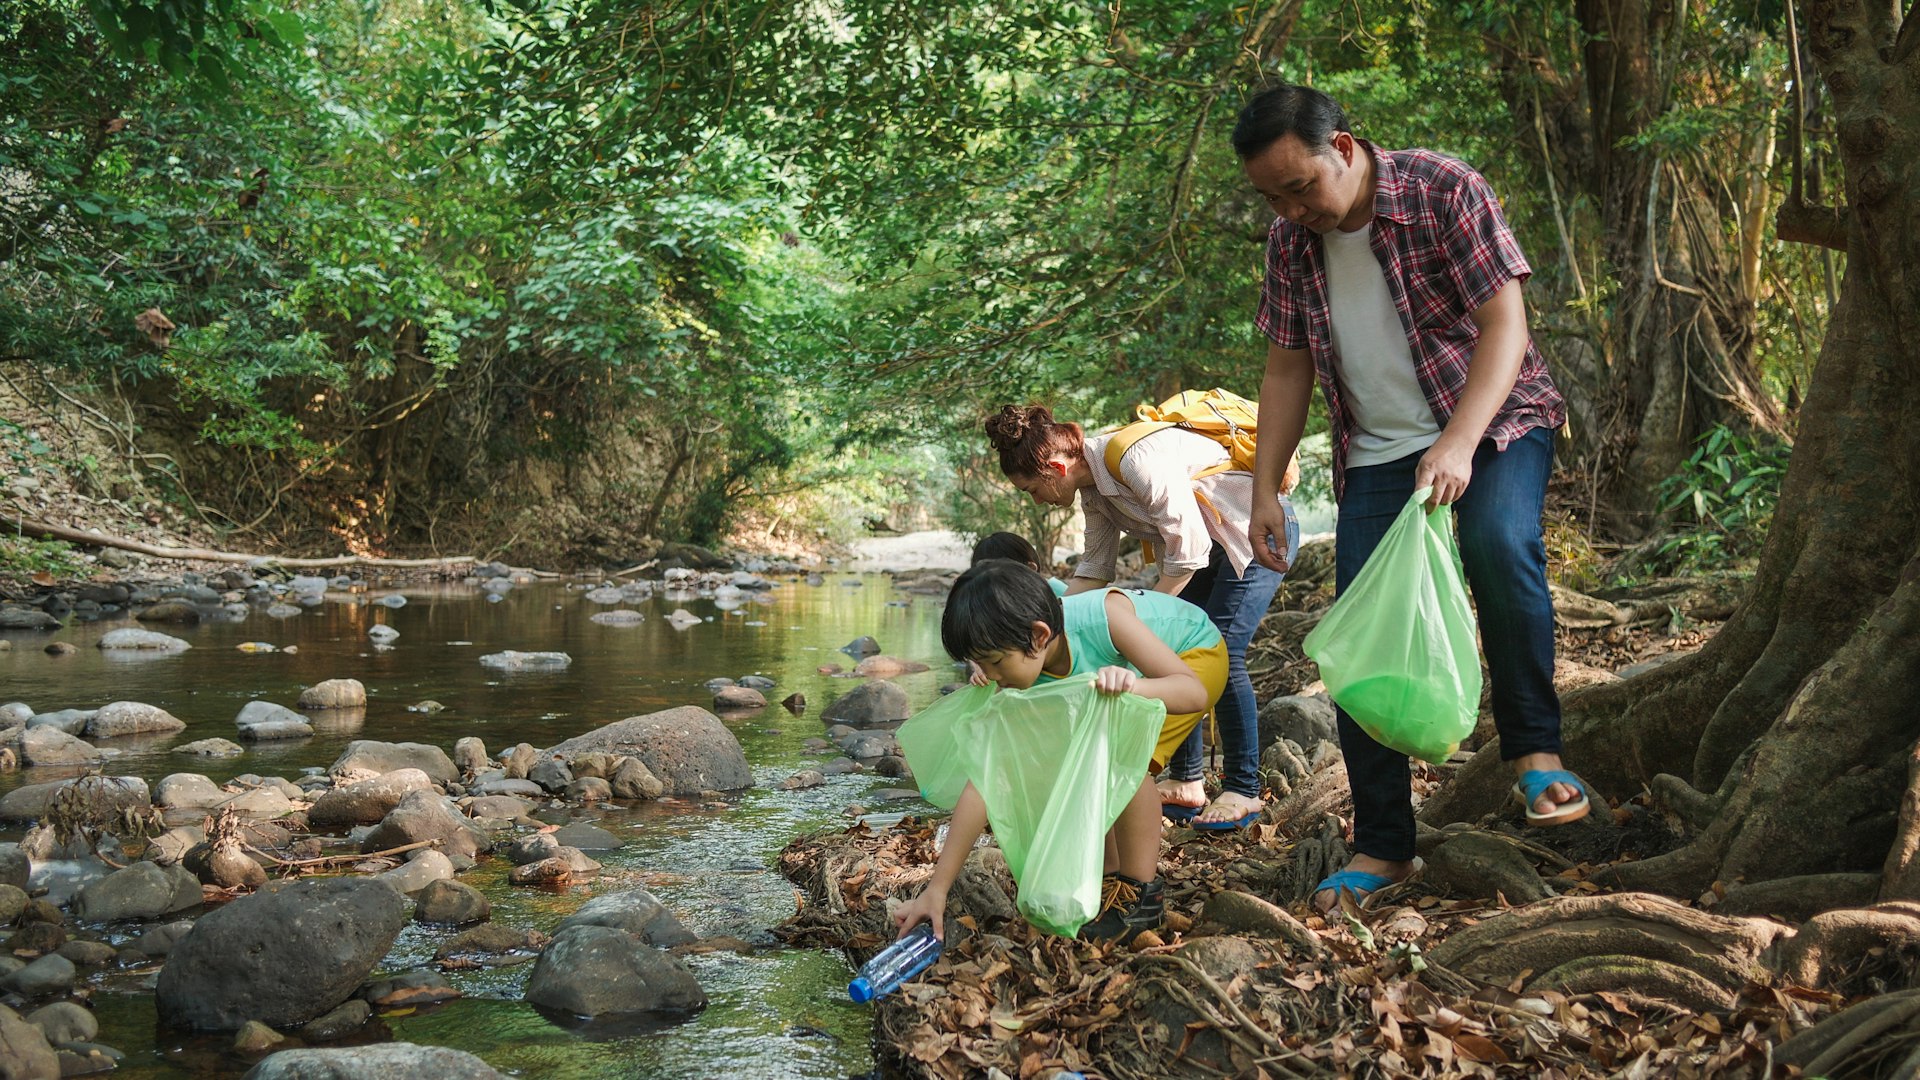 Collecting trash from the river of a US national park